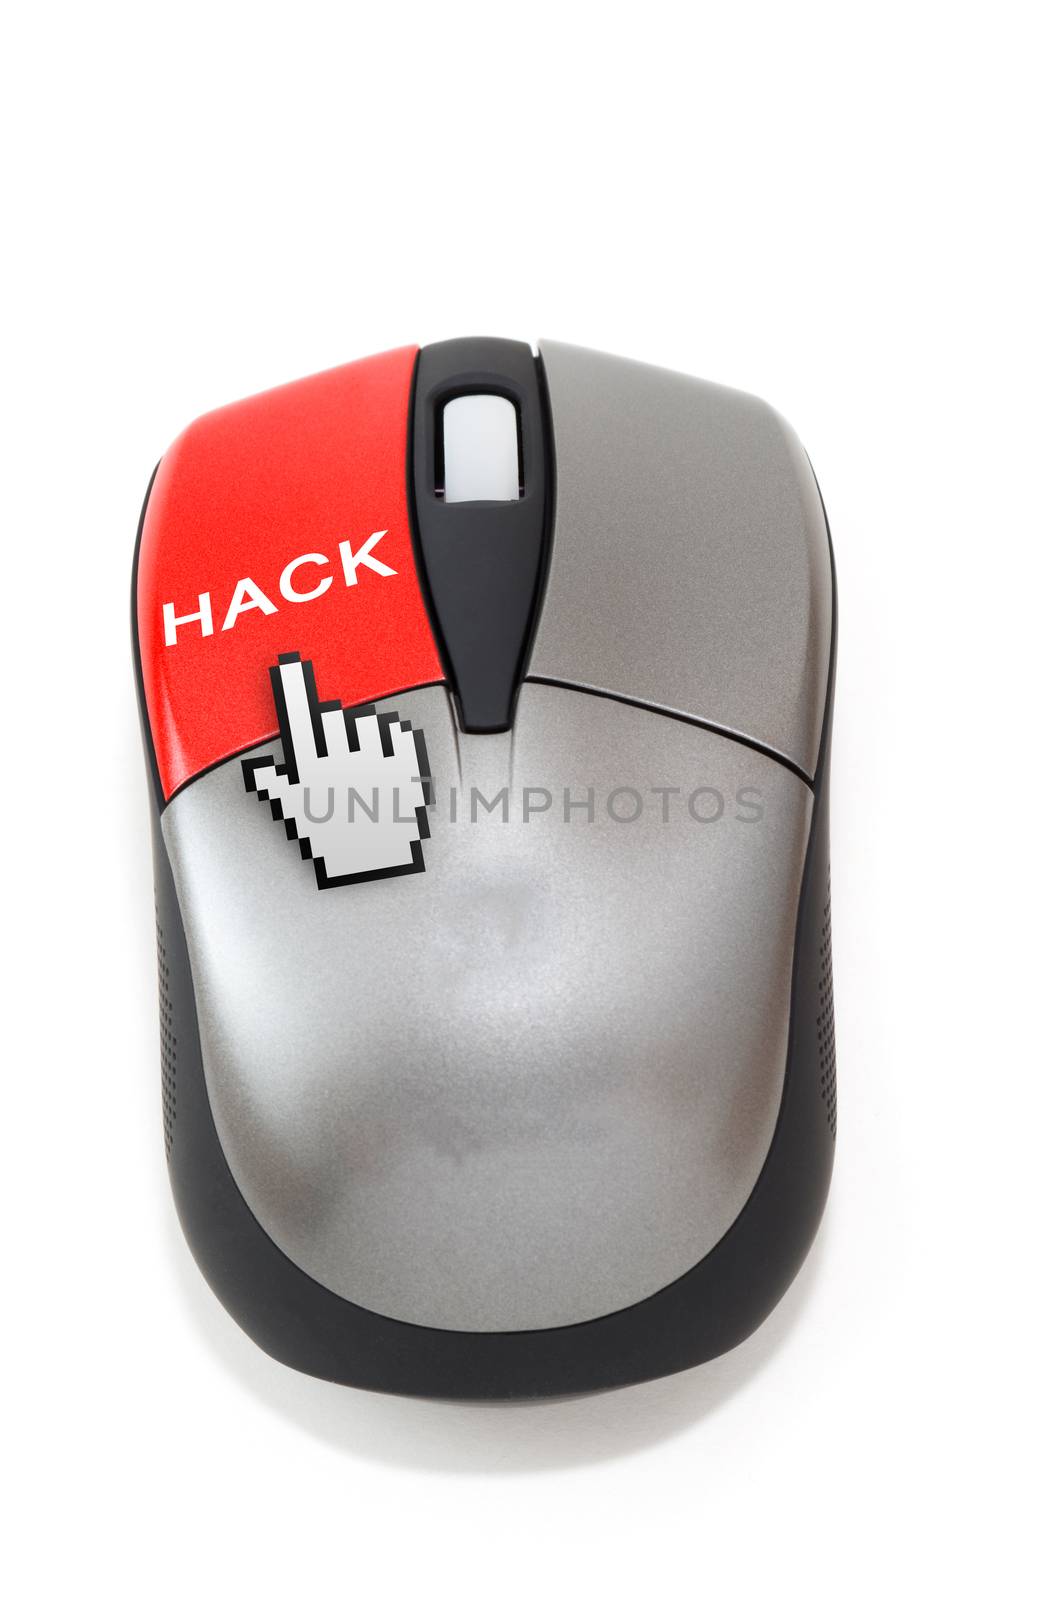 Hand cursor clicking on hack button by daoleduc